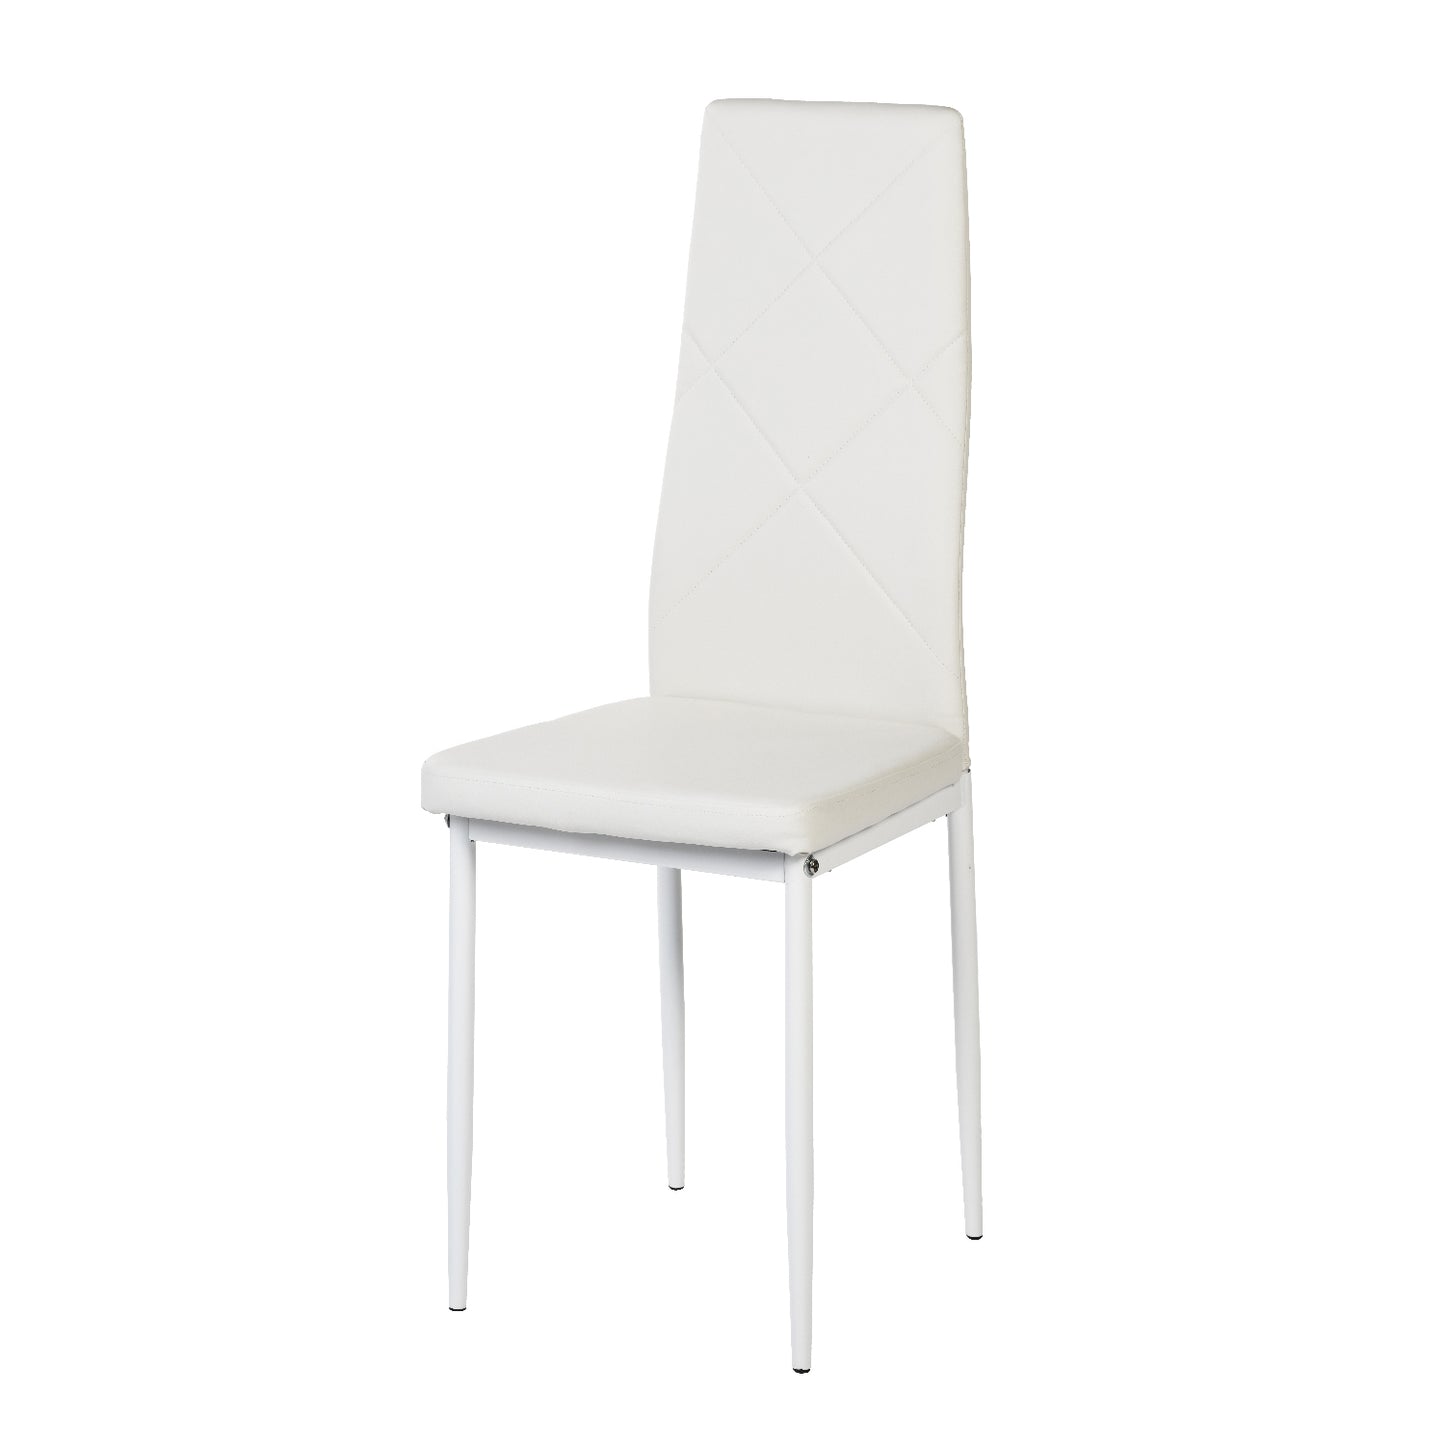 ANN-DIAMOND Upholstered Side Chairs (Set of 6)